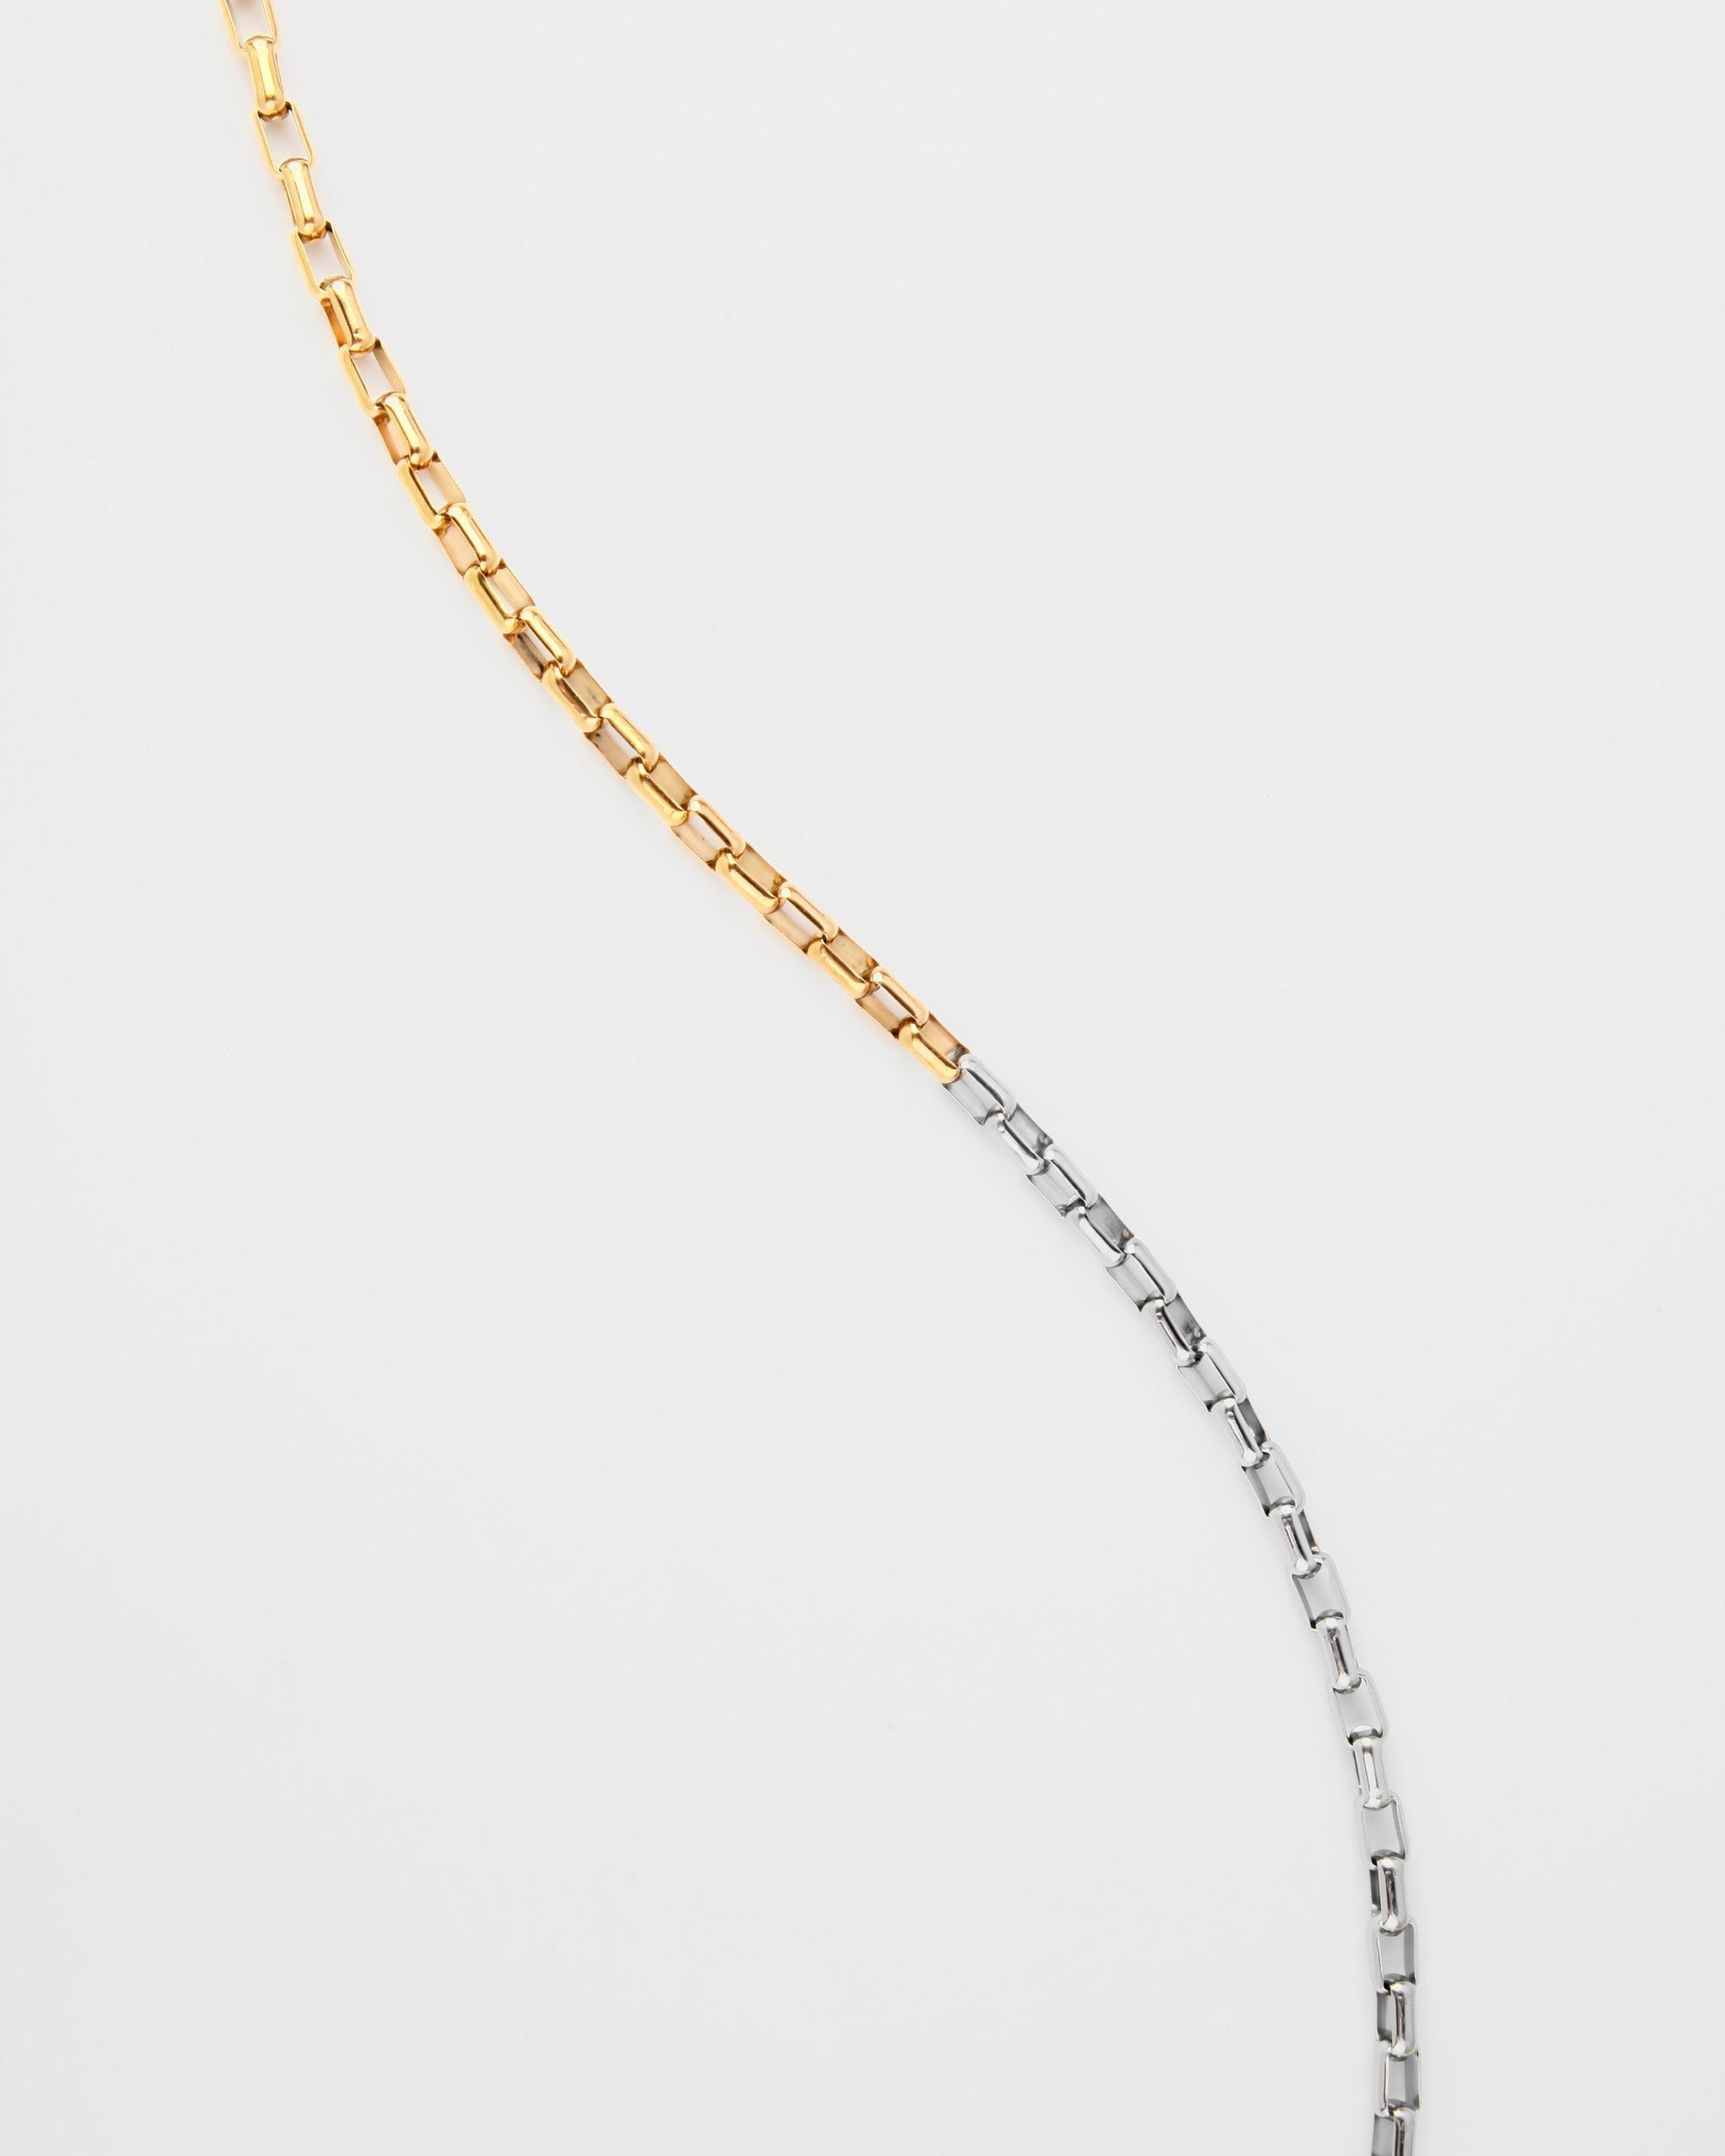 A For Art&#39;s Sake® Luna Glasses Chain, placed against a plain white background. The upper half of the chain is gold-toned, while the lower half is silver-toned, forming an elegant and continuous curve from top to bottom.